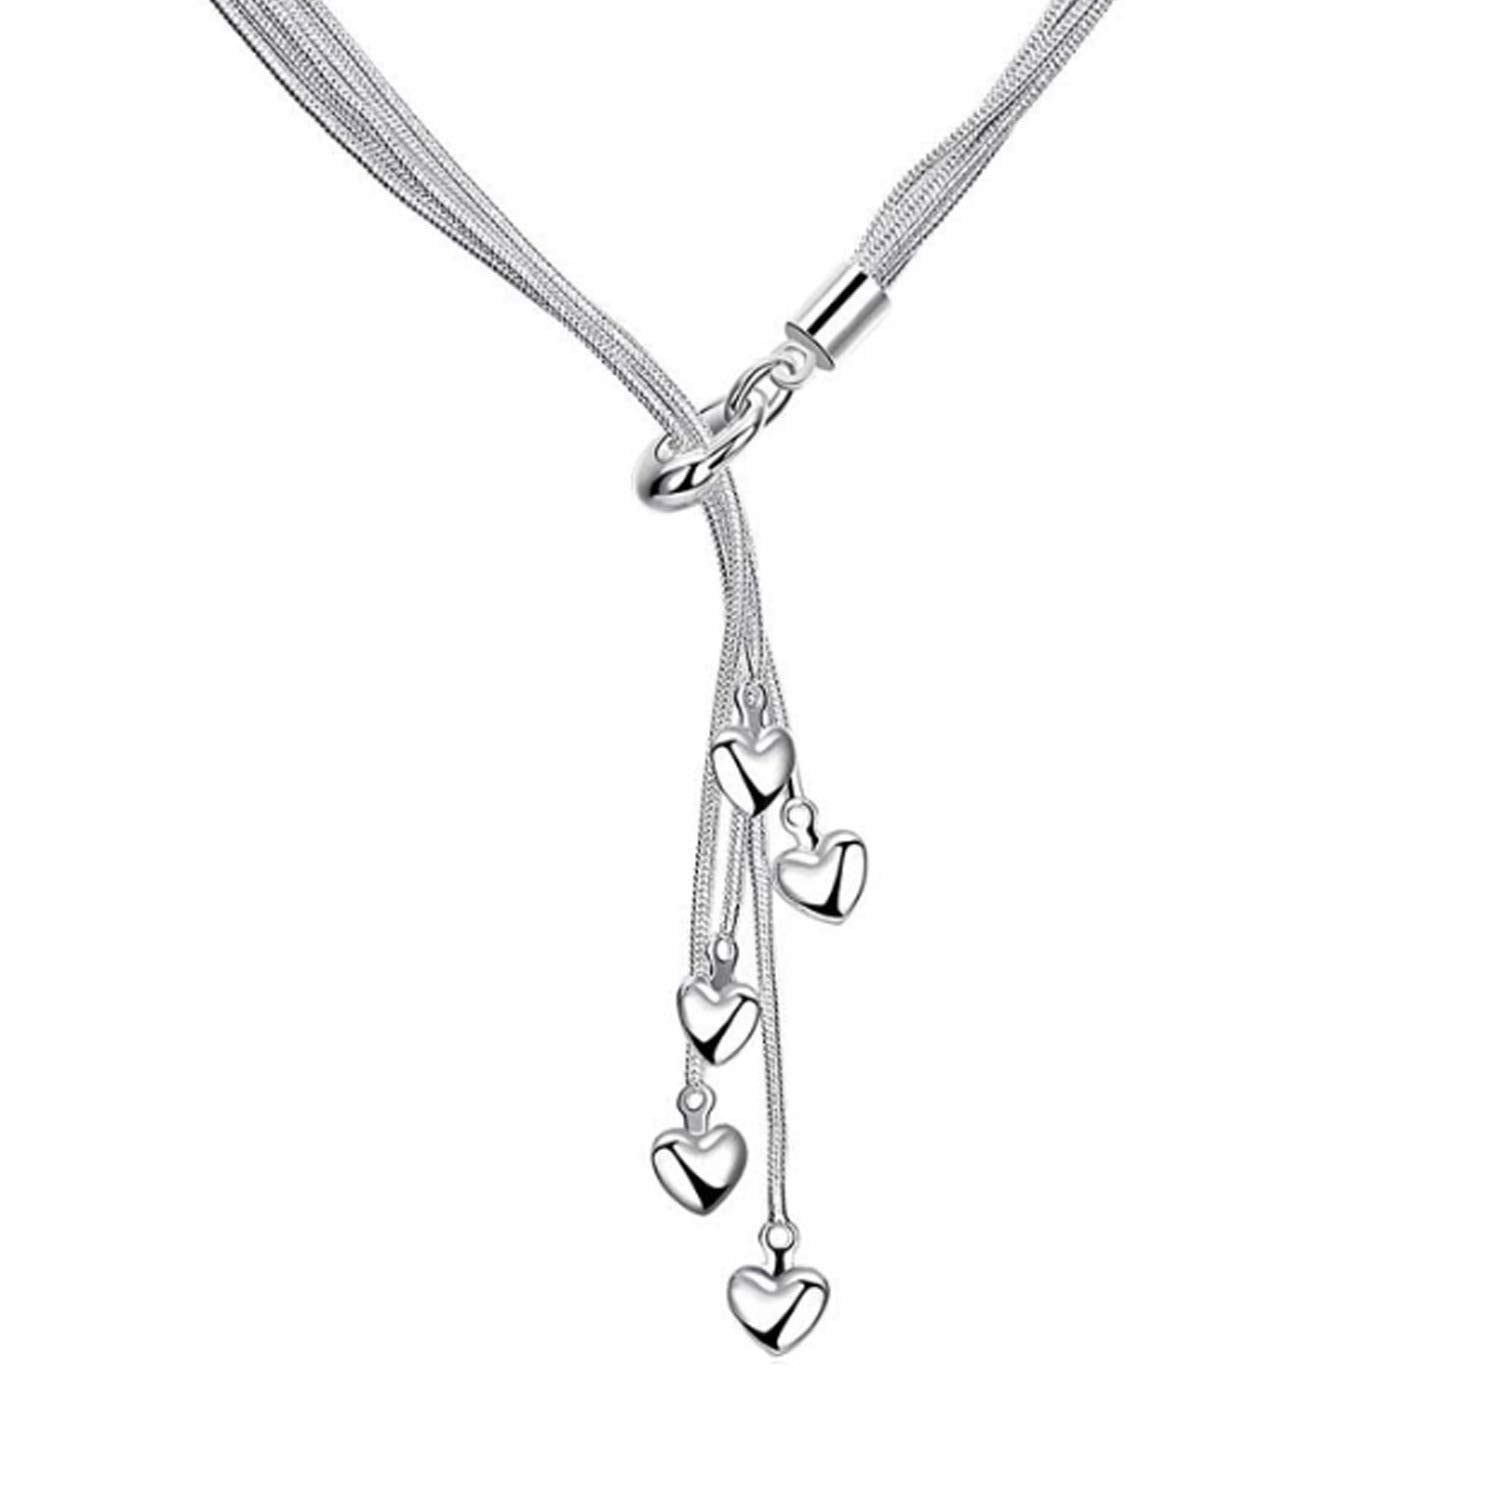 Yellow Chimes Choker Necklace for Women Silver Plated Hanging Heart Charms Layered Chain Necklace for Women and Girls